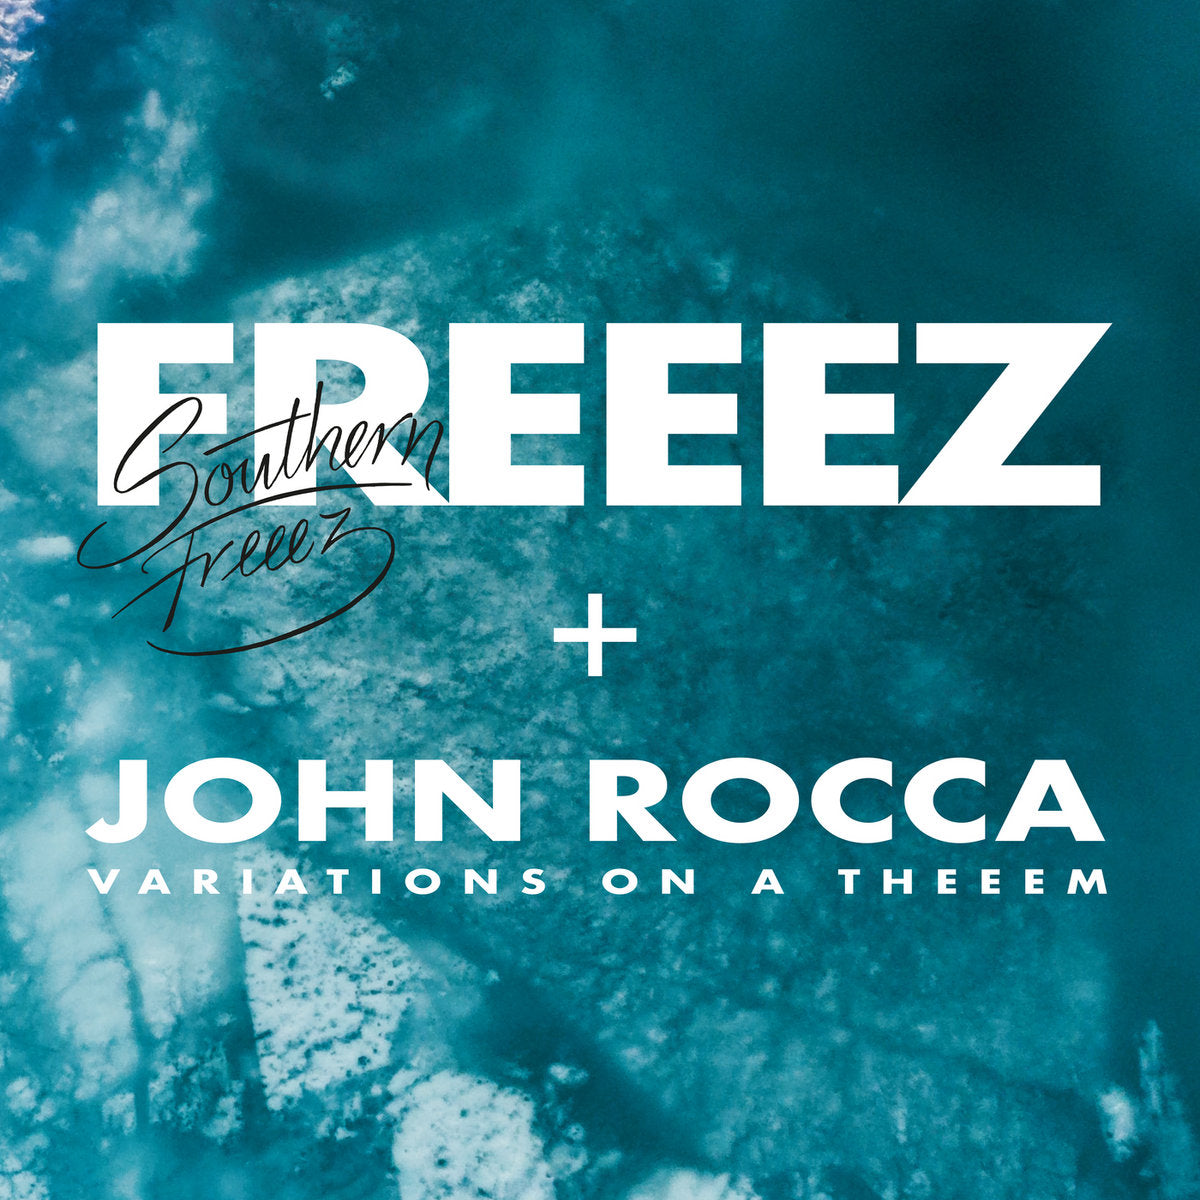 Freeez + John Rocca ~ Southern Freeez / Variations On A Theeem